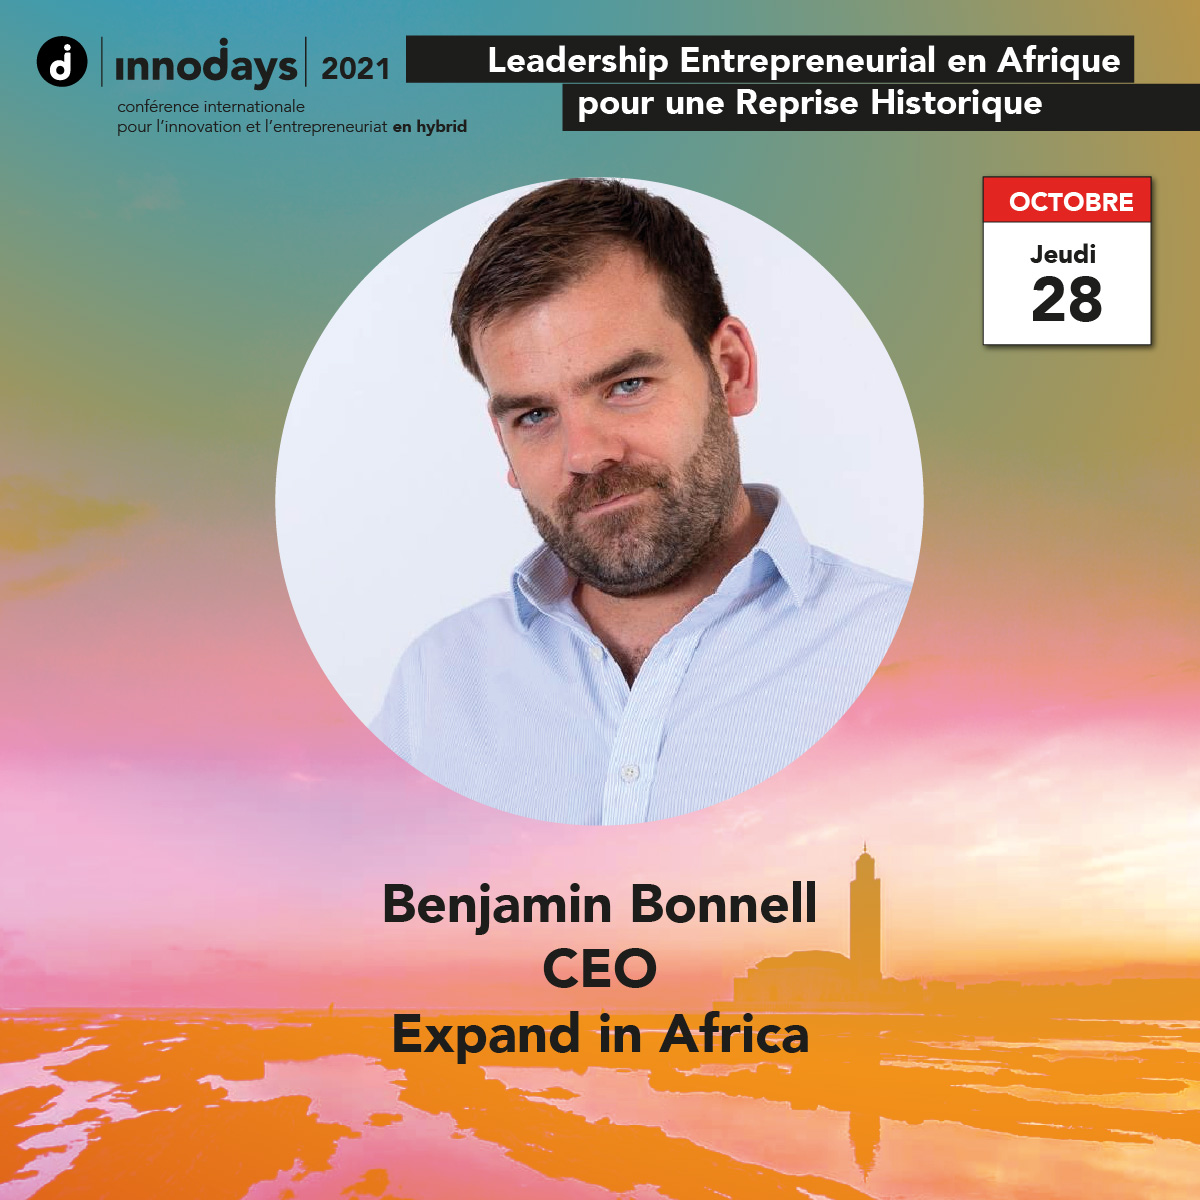 Benjamin Bonnell - CEO - Expand in Africa